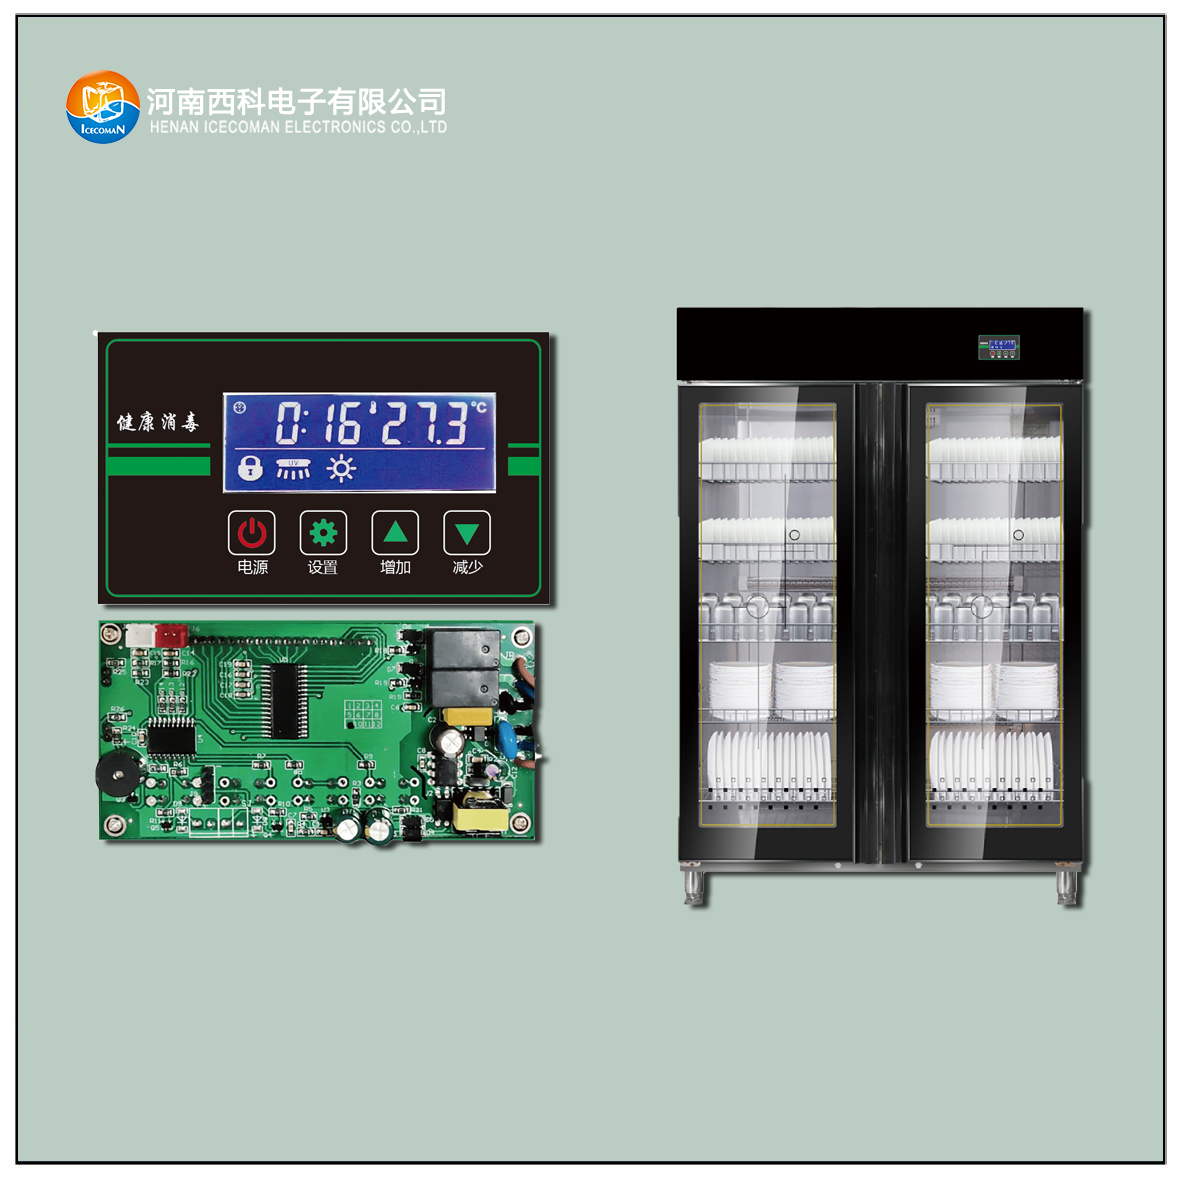 Xdg-lcd-a disinfection cabinet controller